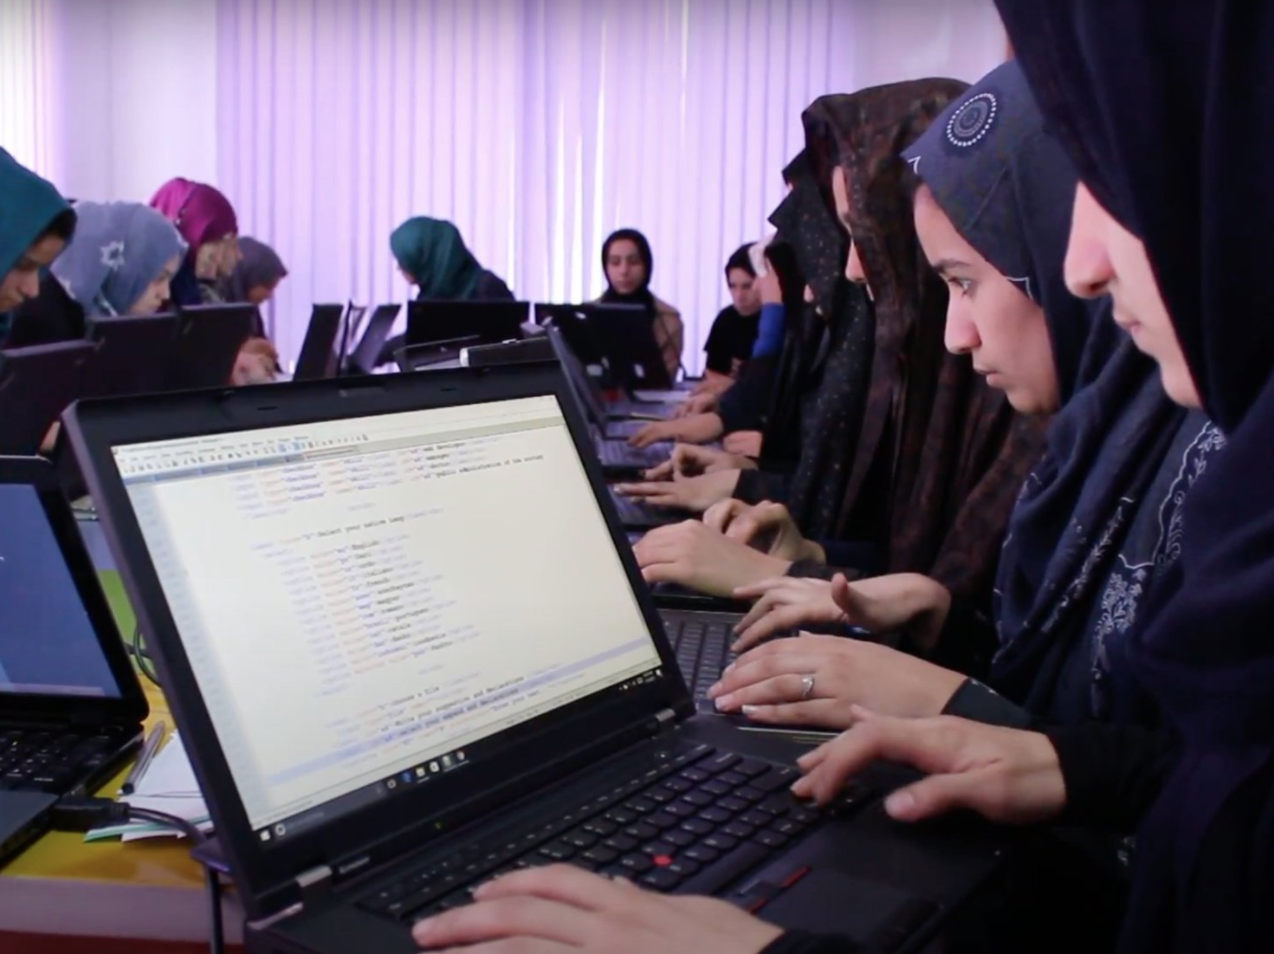 Girls learn to code at the Code to Inspire school in Herat, Afghanistan.